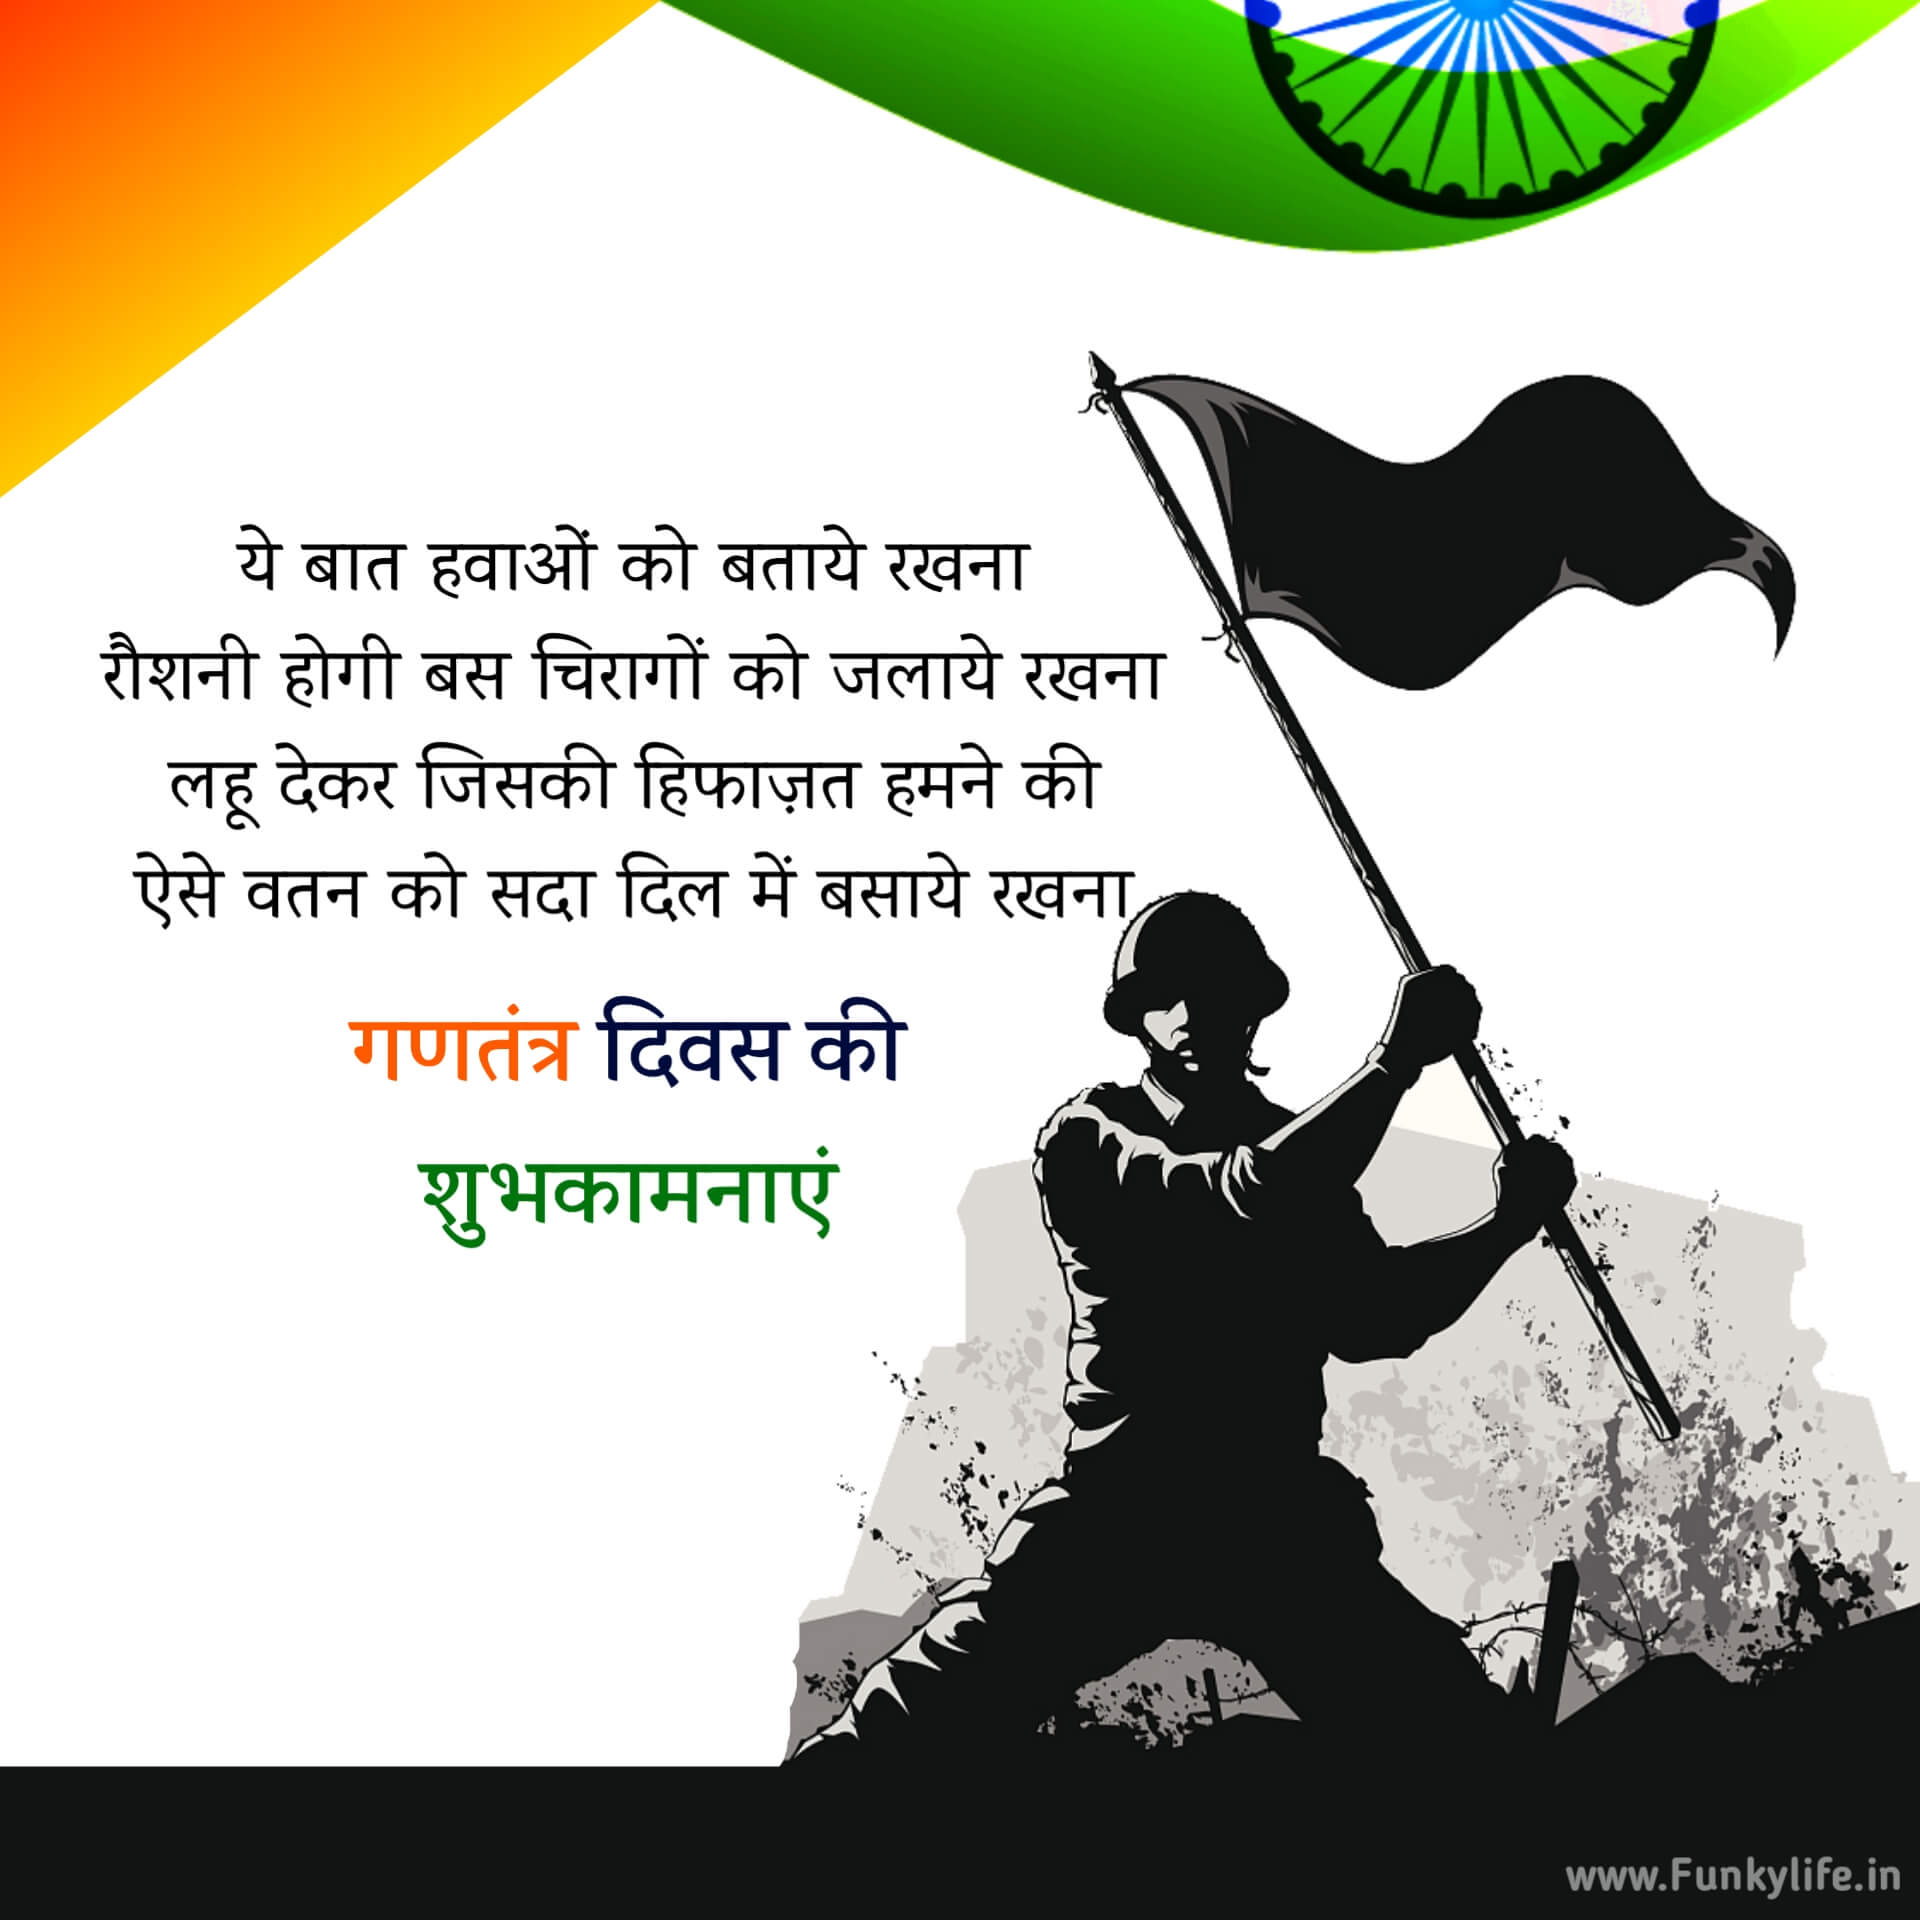 Republic Day Wishes in Hindi for Army